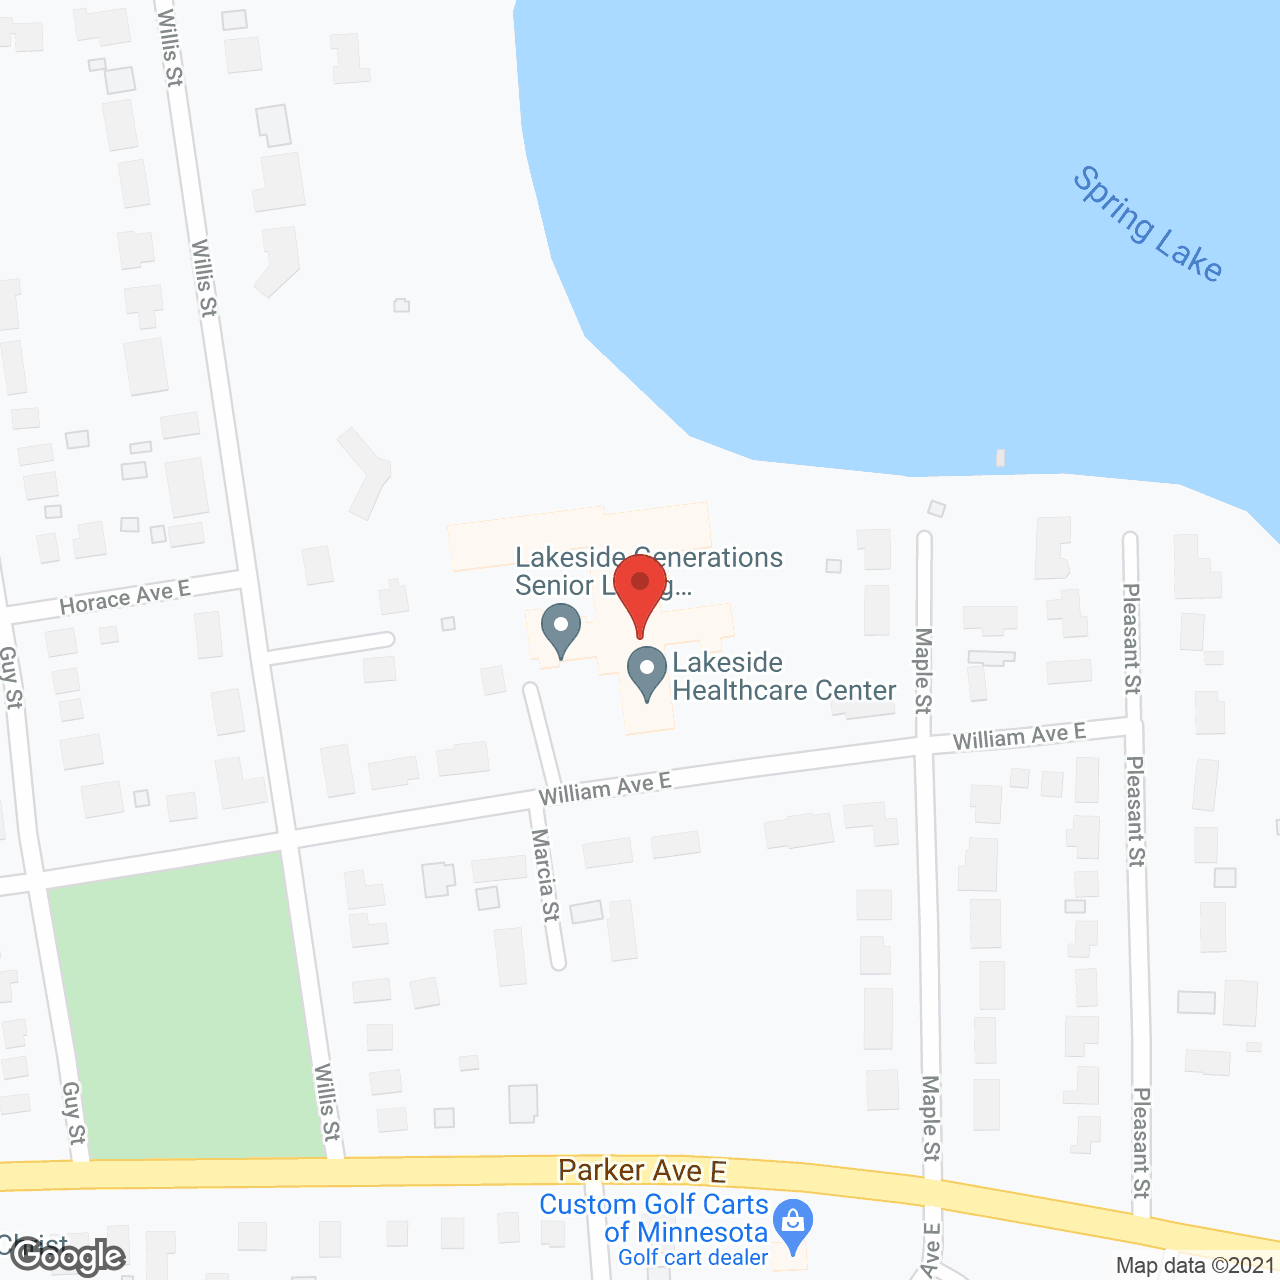 Lakeside Generations Health Care Center in google map